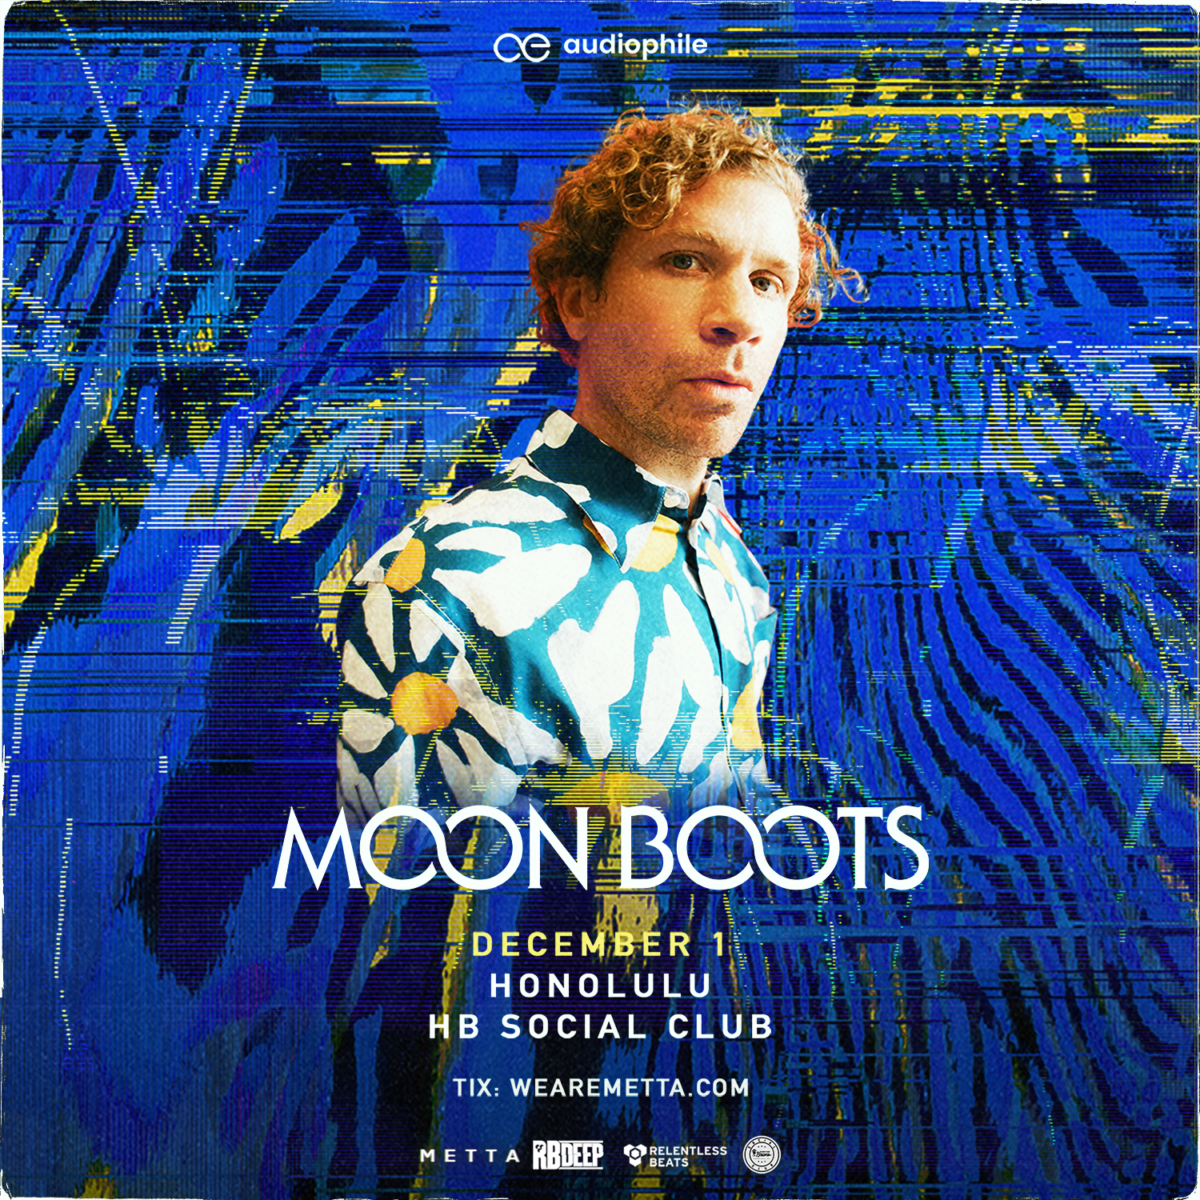 Flyer for Moon Boots